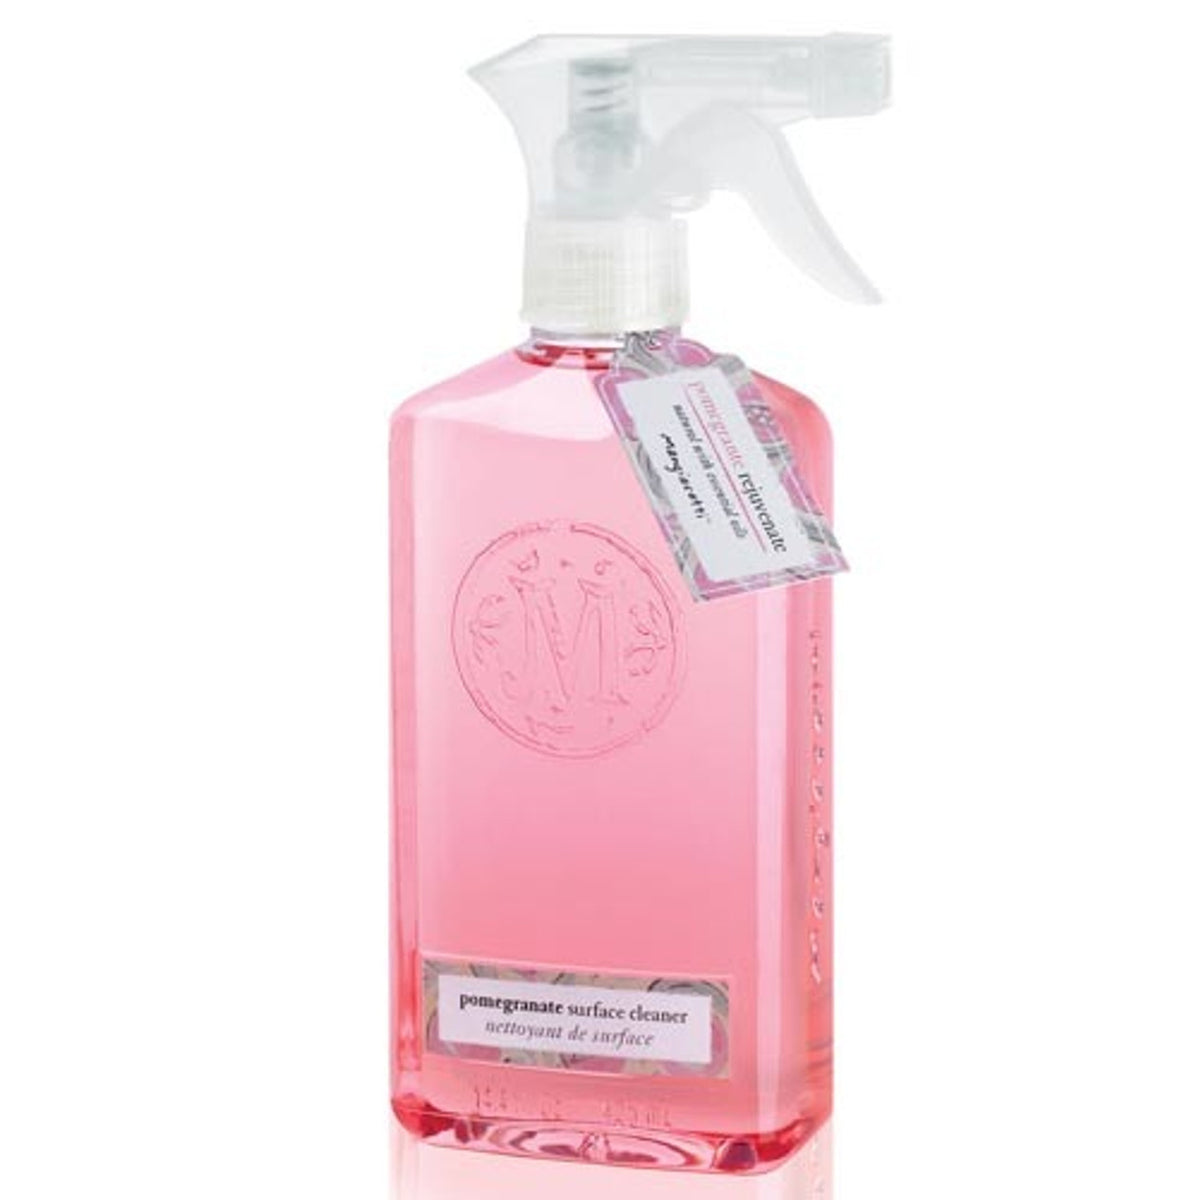 Pomegranate Surface Cleaner